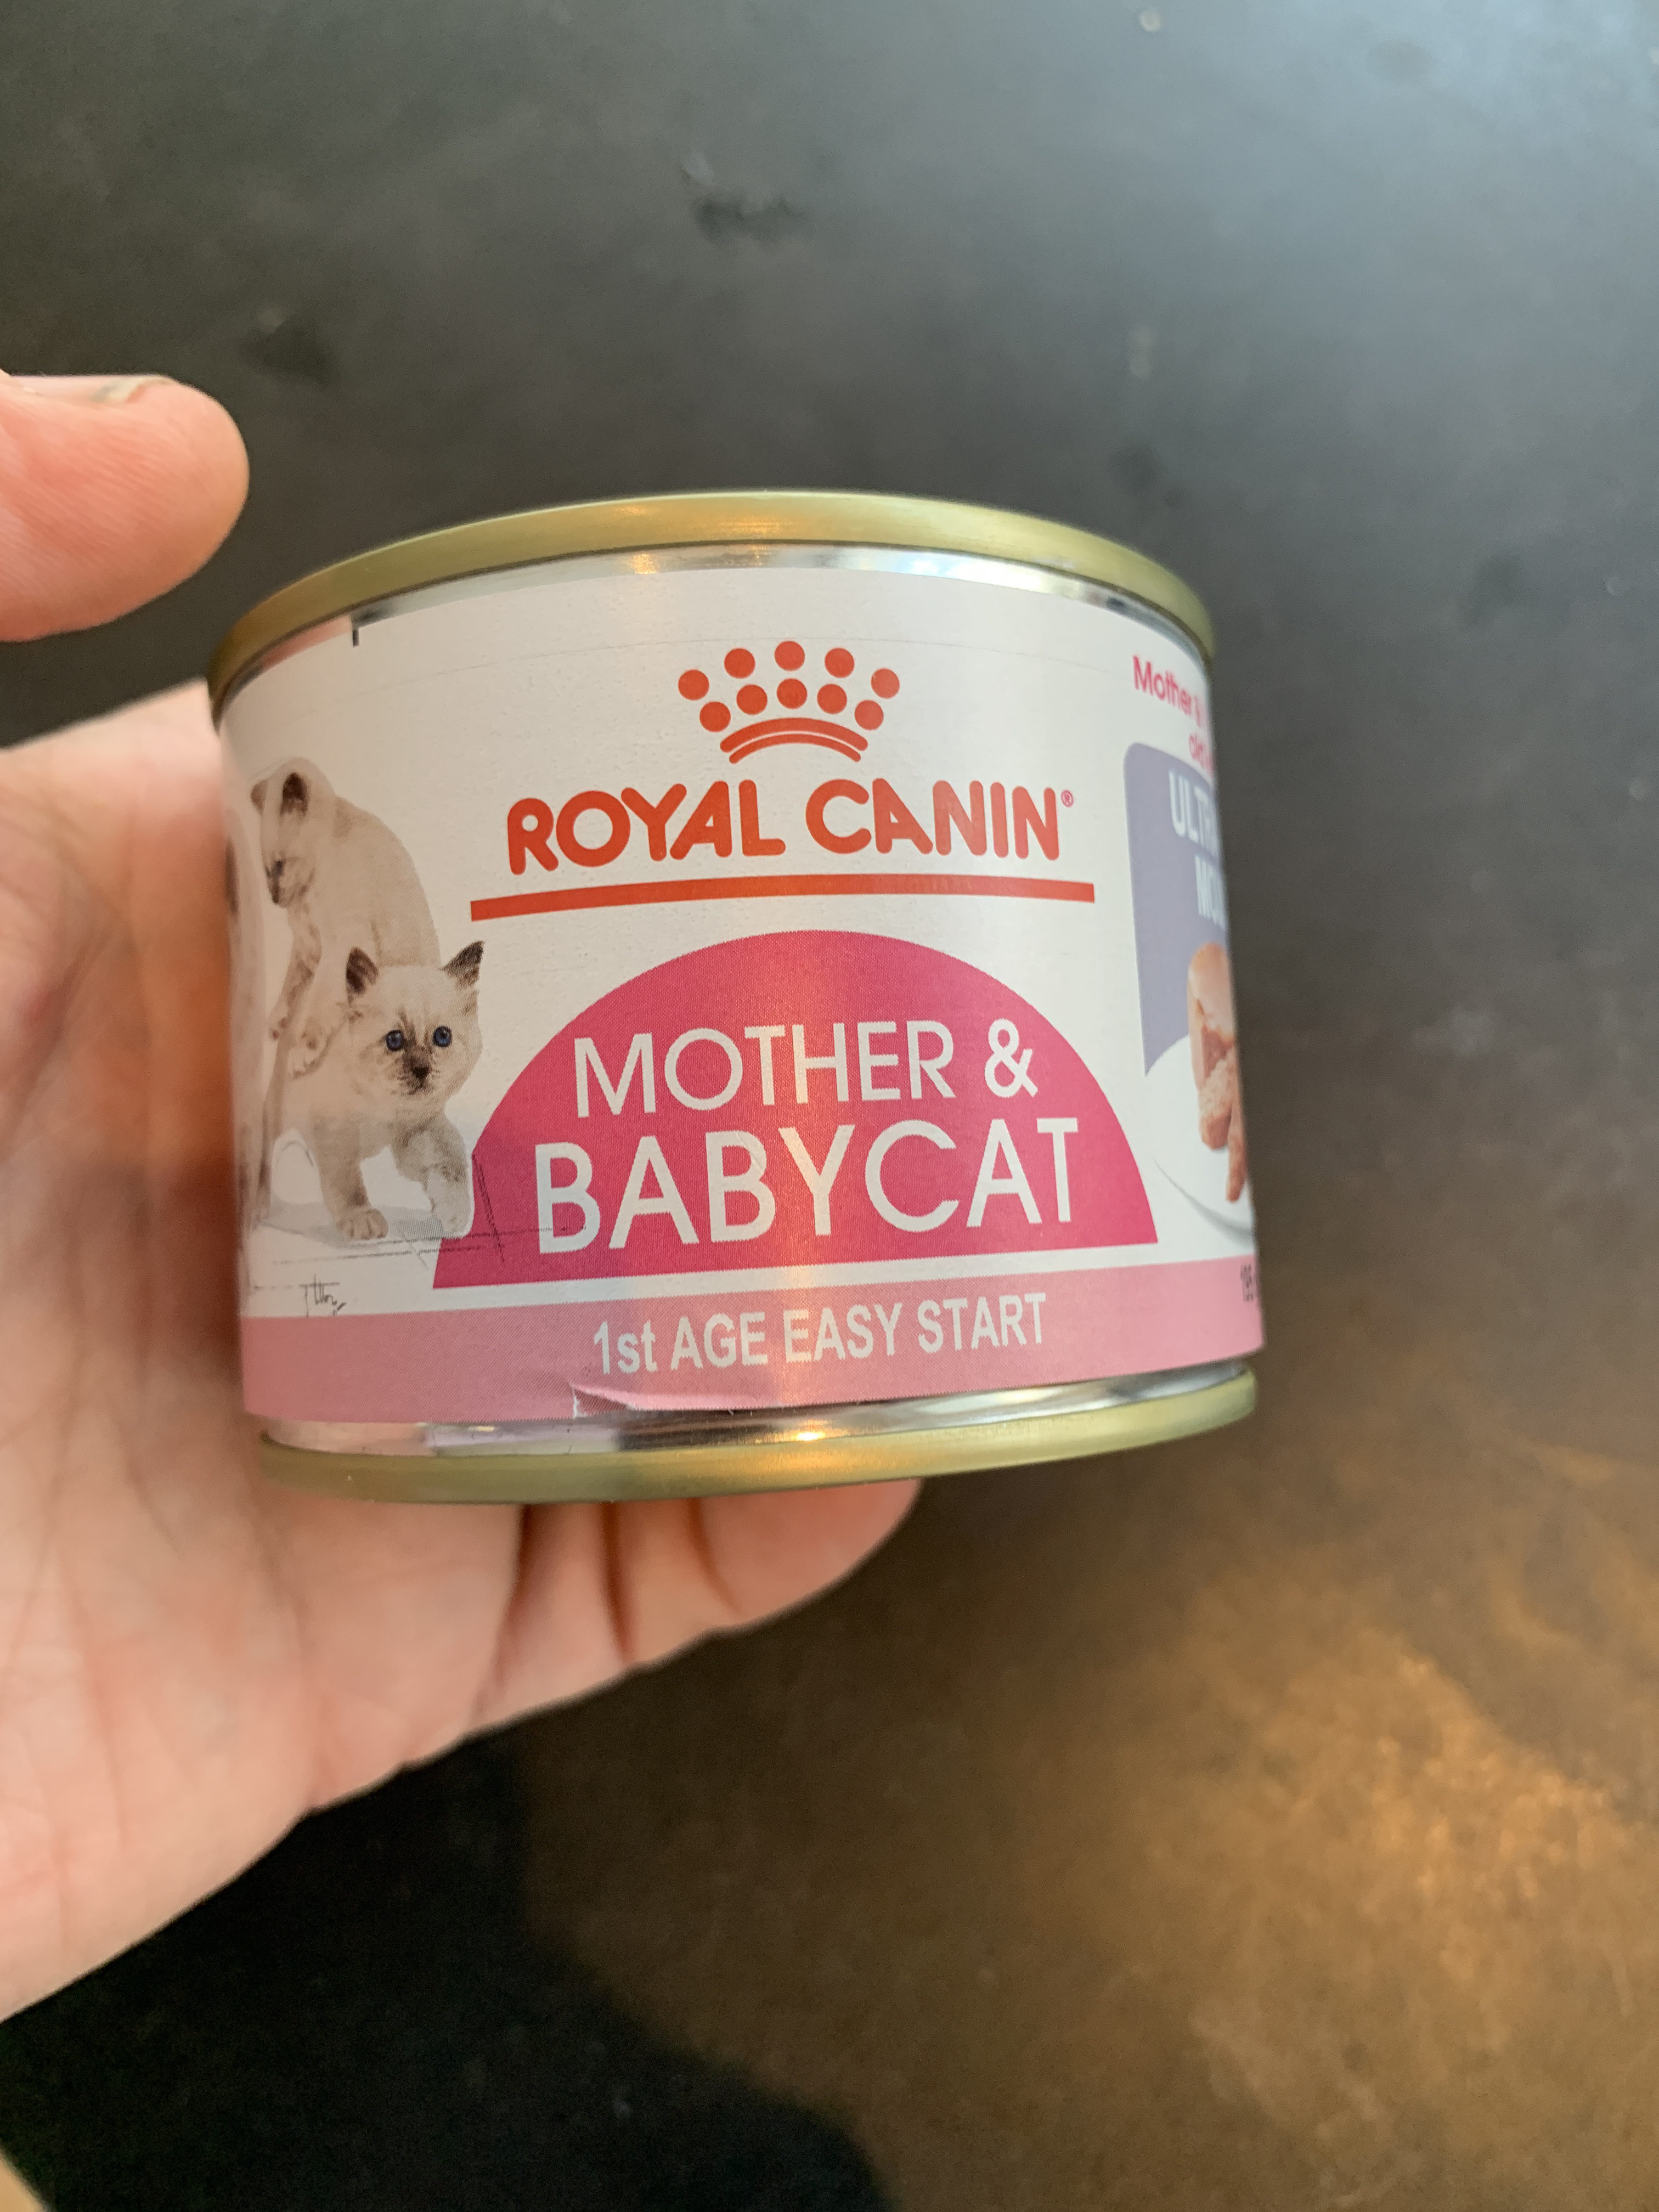 Royal canin mother & babycat - Product - en